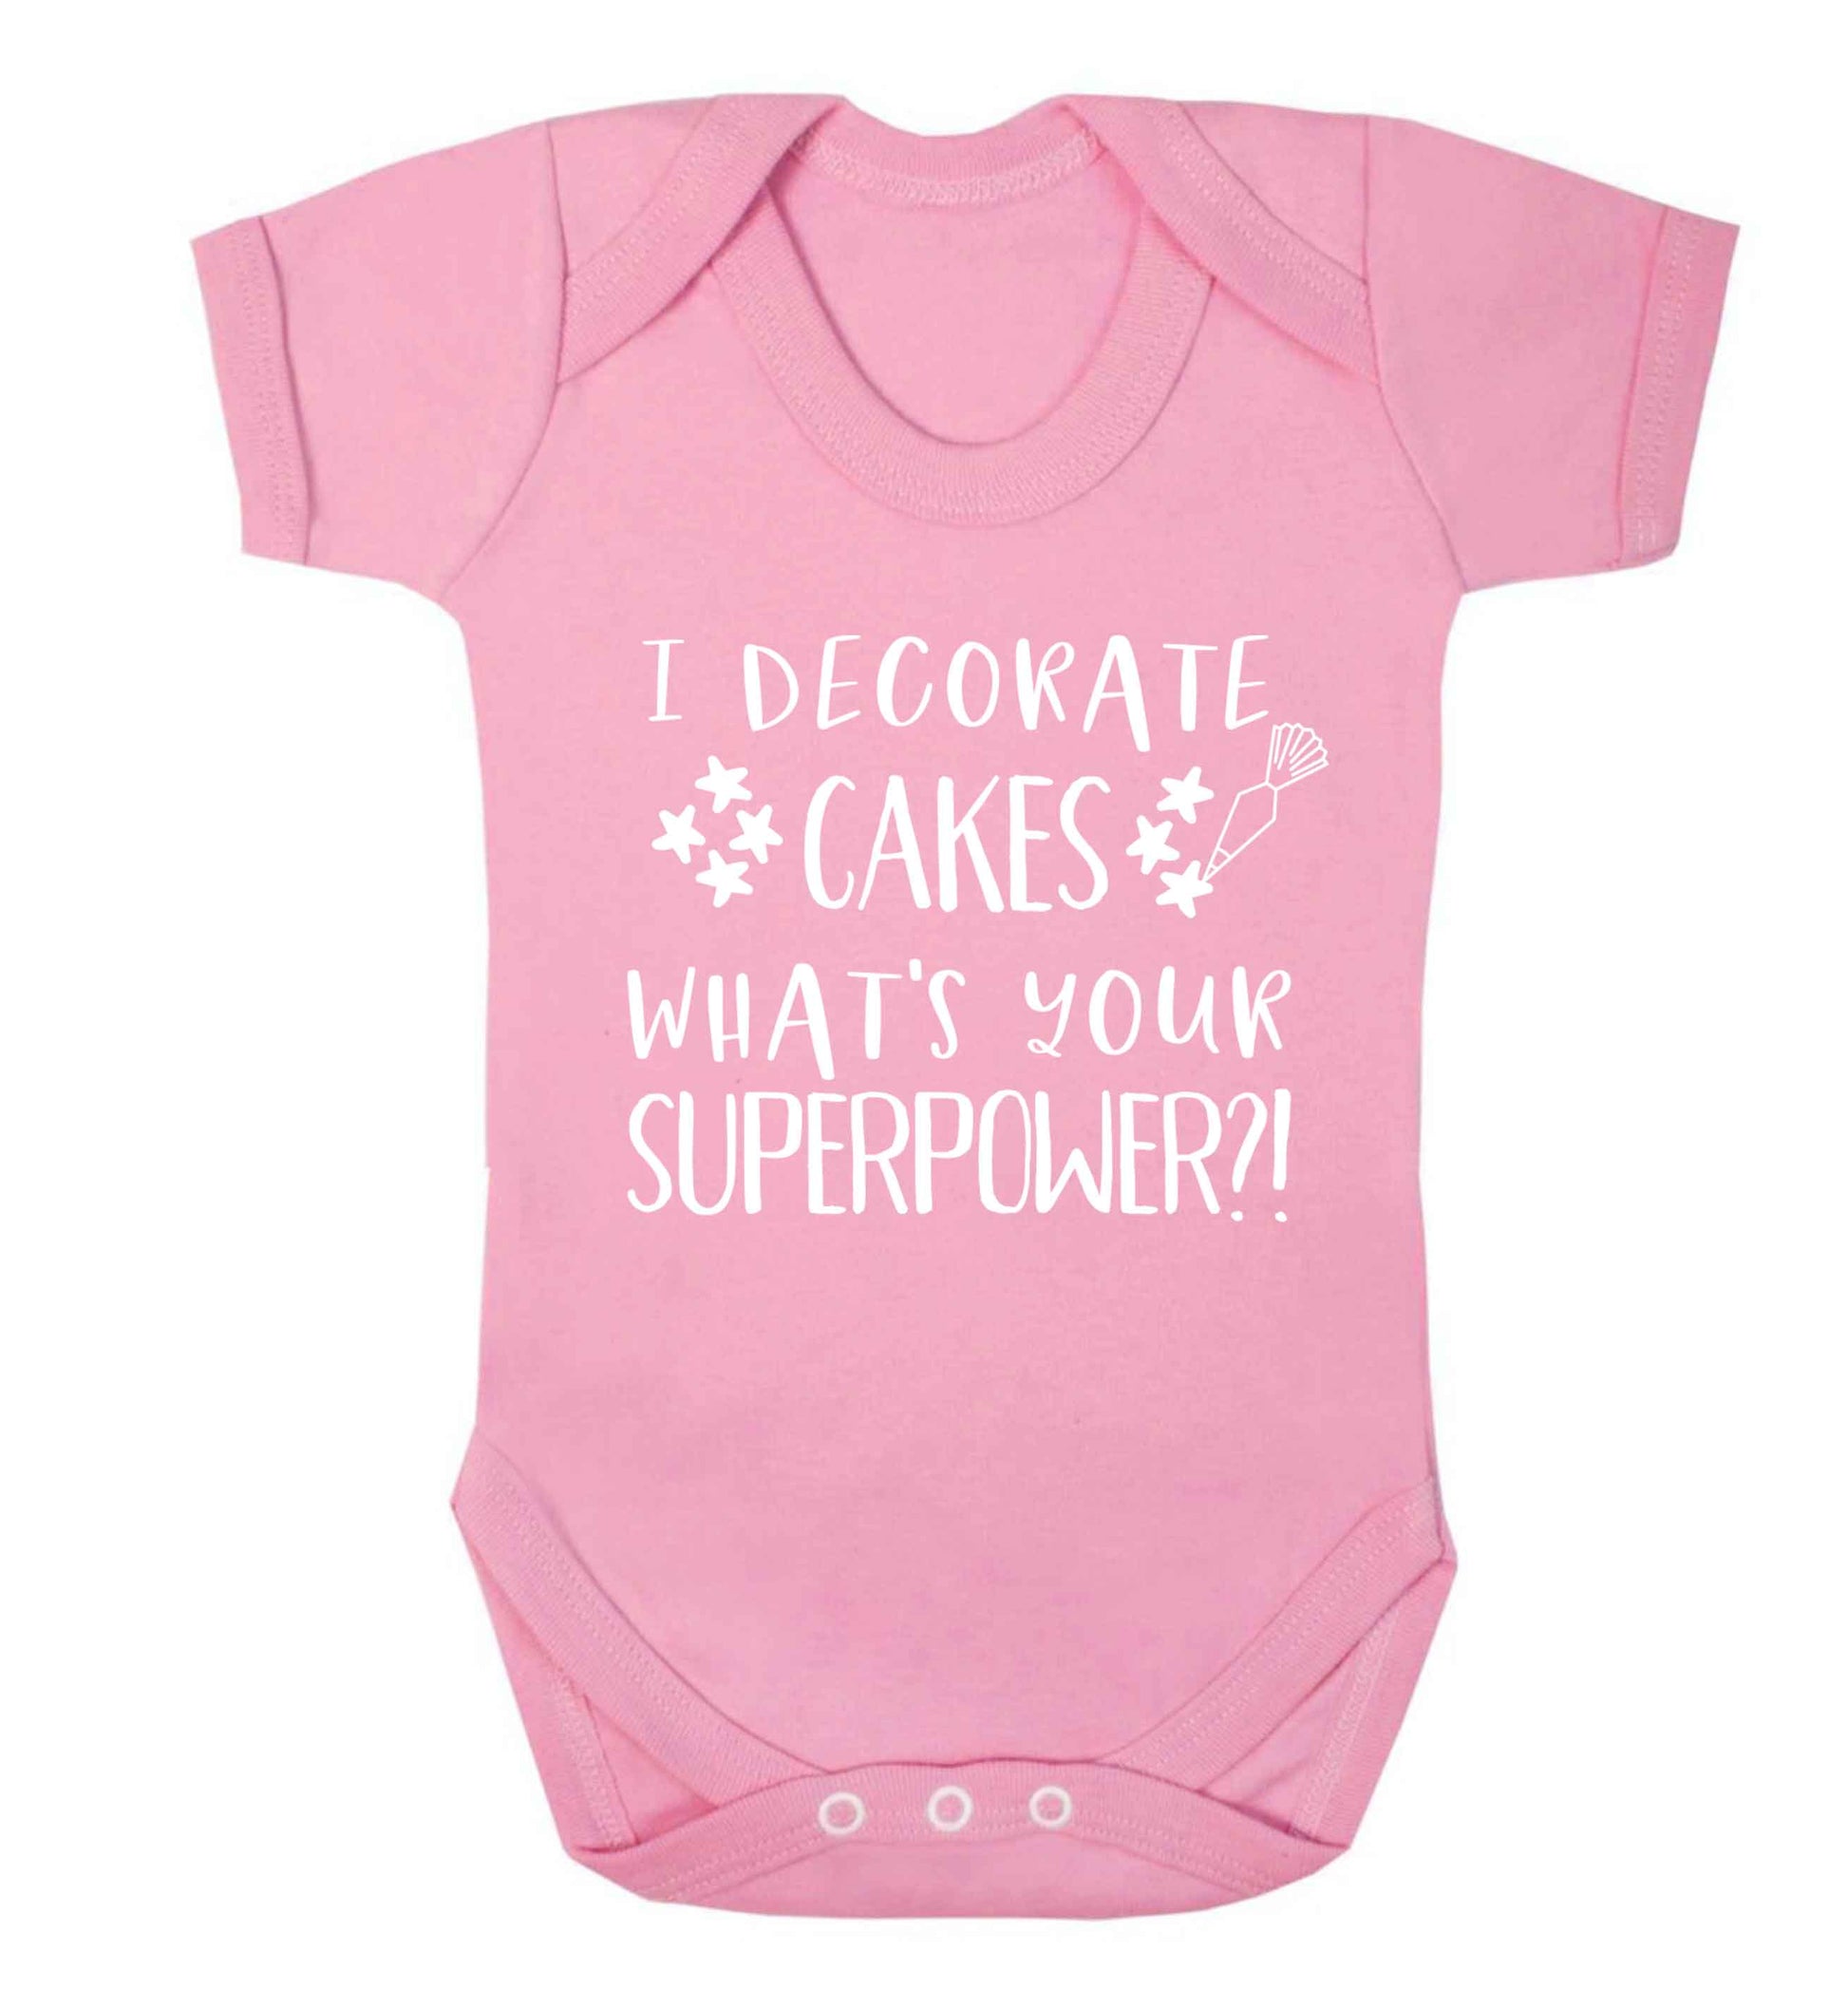 I decorate cakes what's your superpower?! Baby Vest pale pink 18-24 months